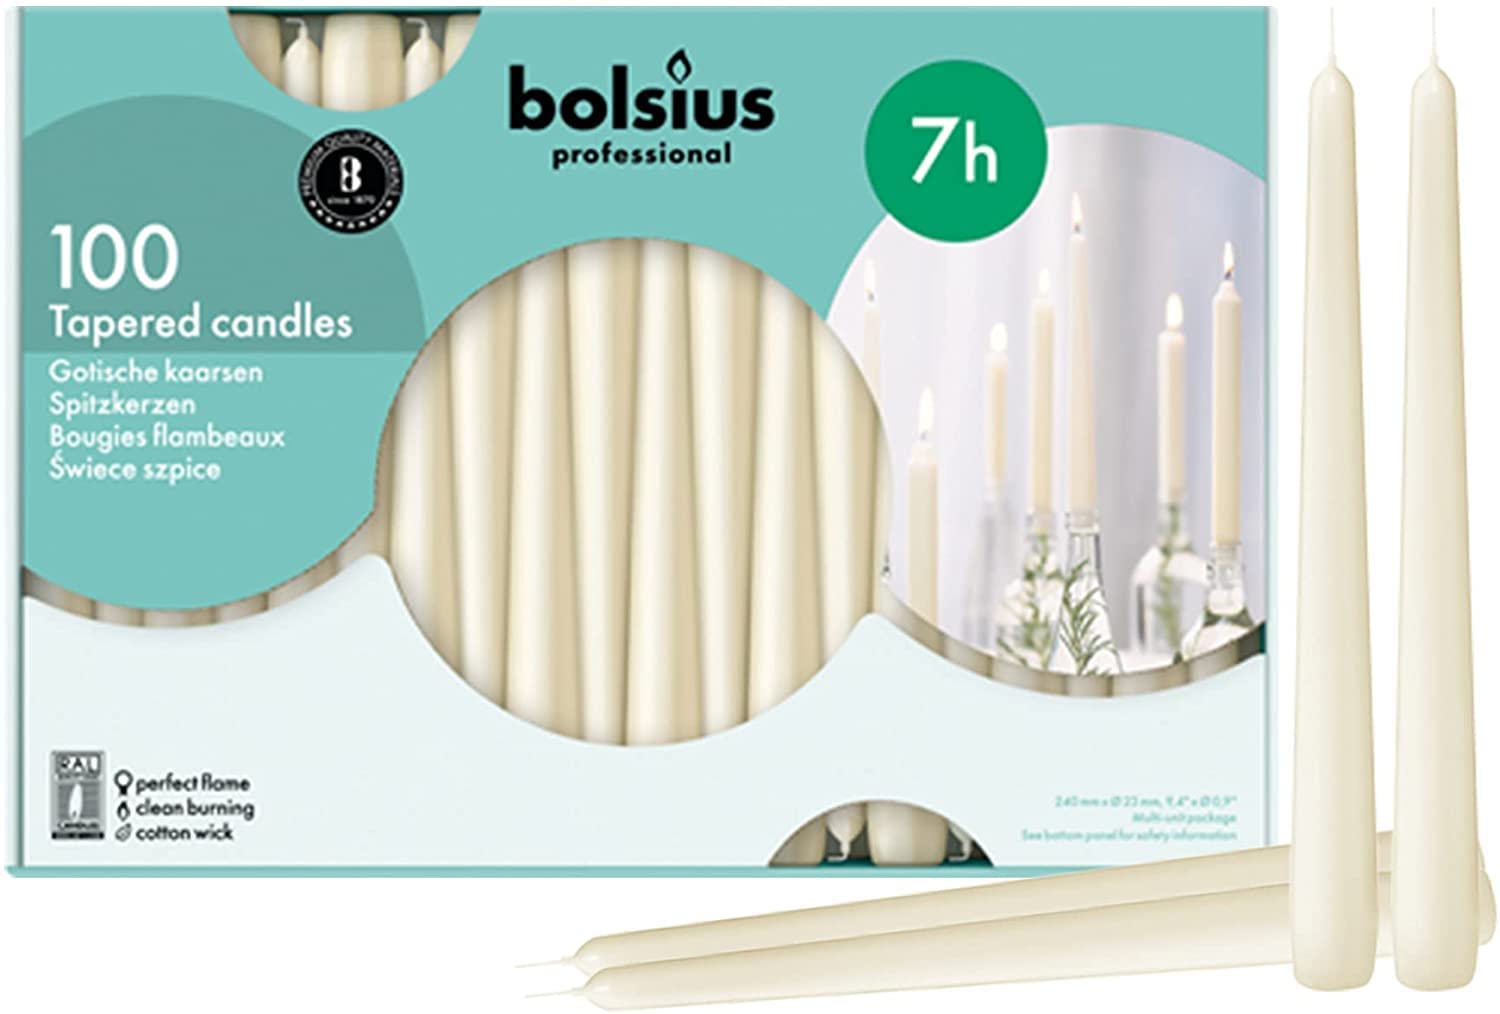 BOLSIUS Ivory Taper Candles 100 Count Bulk Pack - 10 Inch Dinner Candle Set - 7+ Burn Hours - Premium European Quality - Smooth Flame - 100% Cotton Wick - Smokeless & Dripless Household Candlesticks  - Very Good